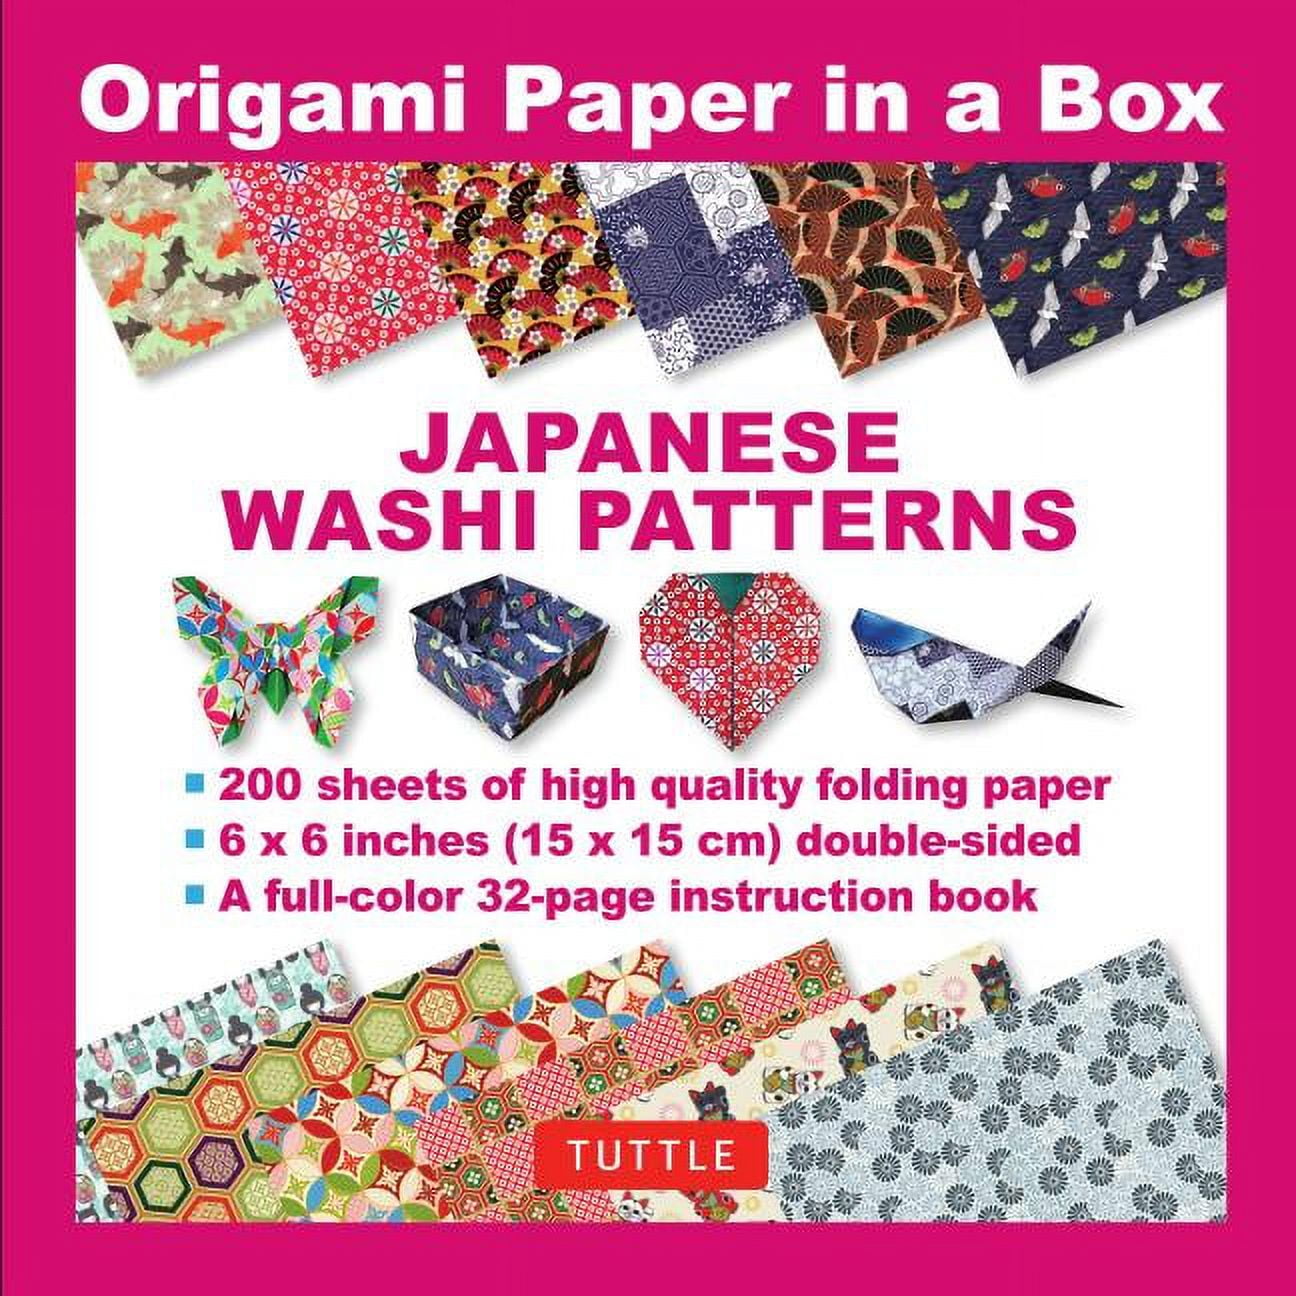 Origami Paper in a Box - Japanese Washi Patterns: 200 Sheets of Tuttle  Origami Paper: 6x6 Inch Origami Paper Printed with 12 Different Patterns